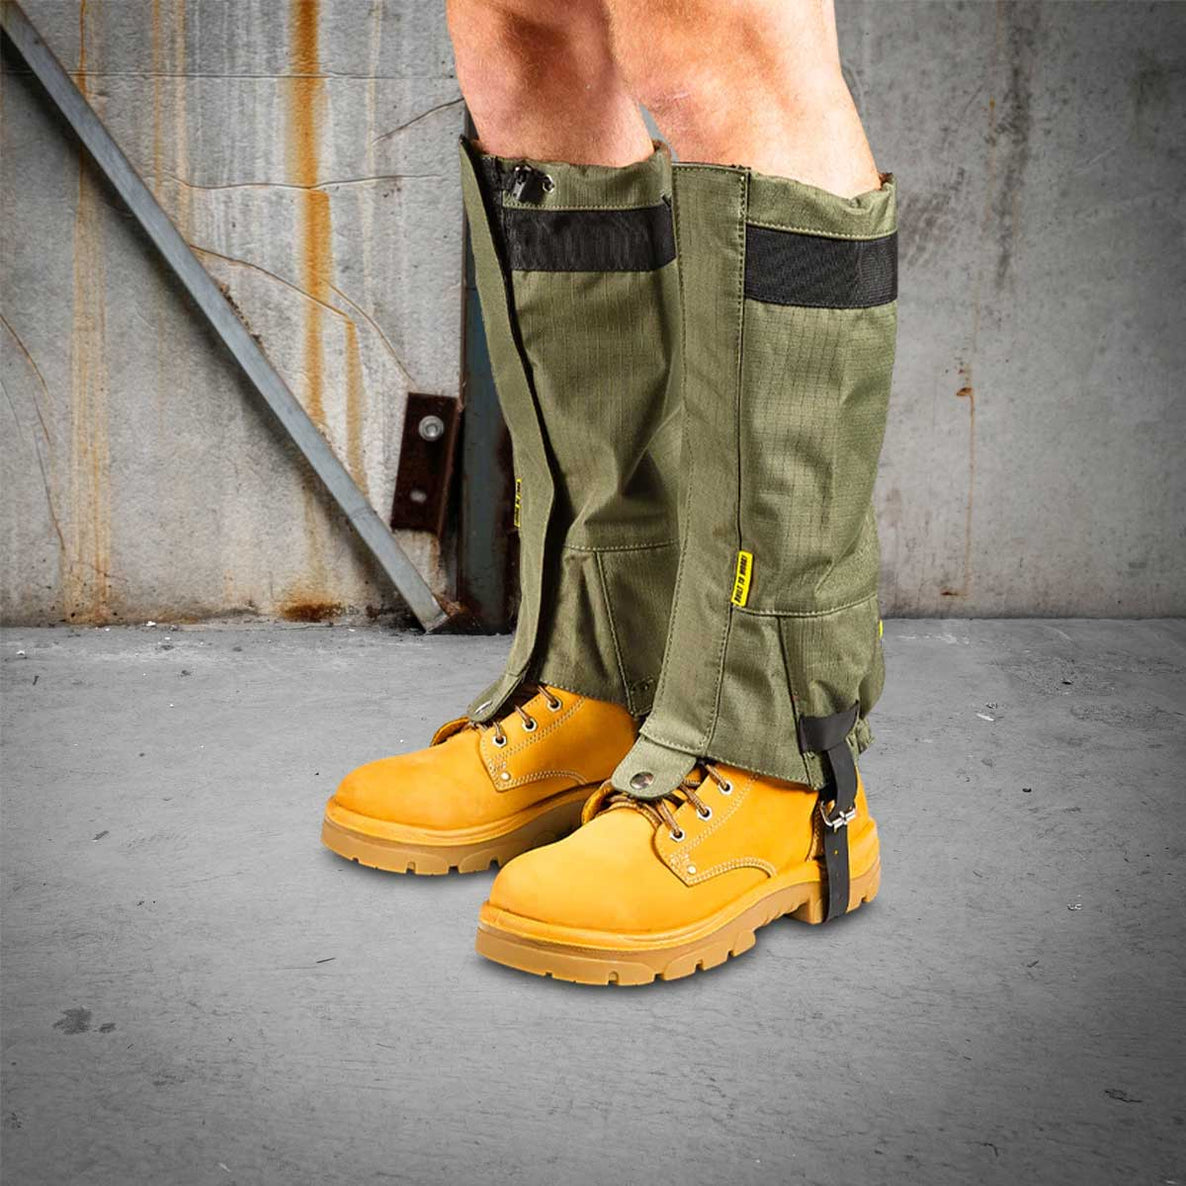 Leg Gaiters RX04A305 by Rugged Xtremes